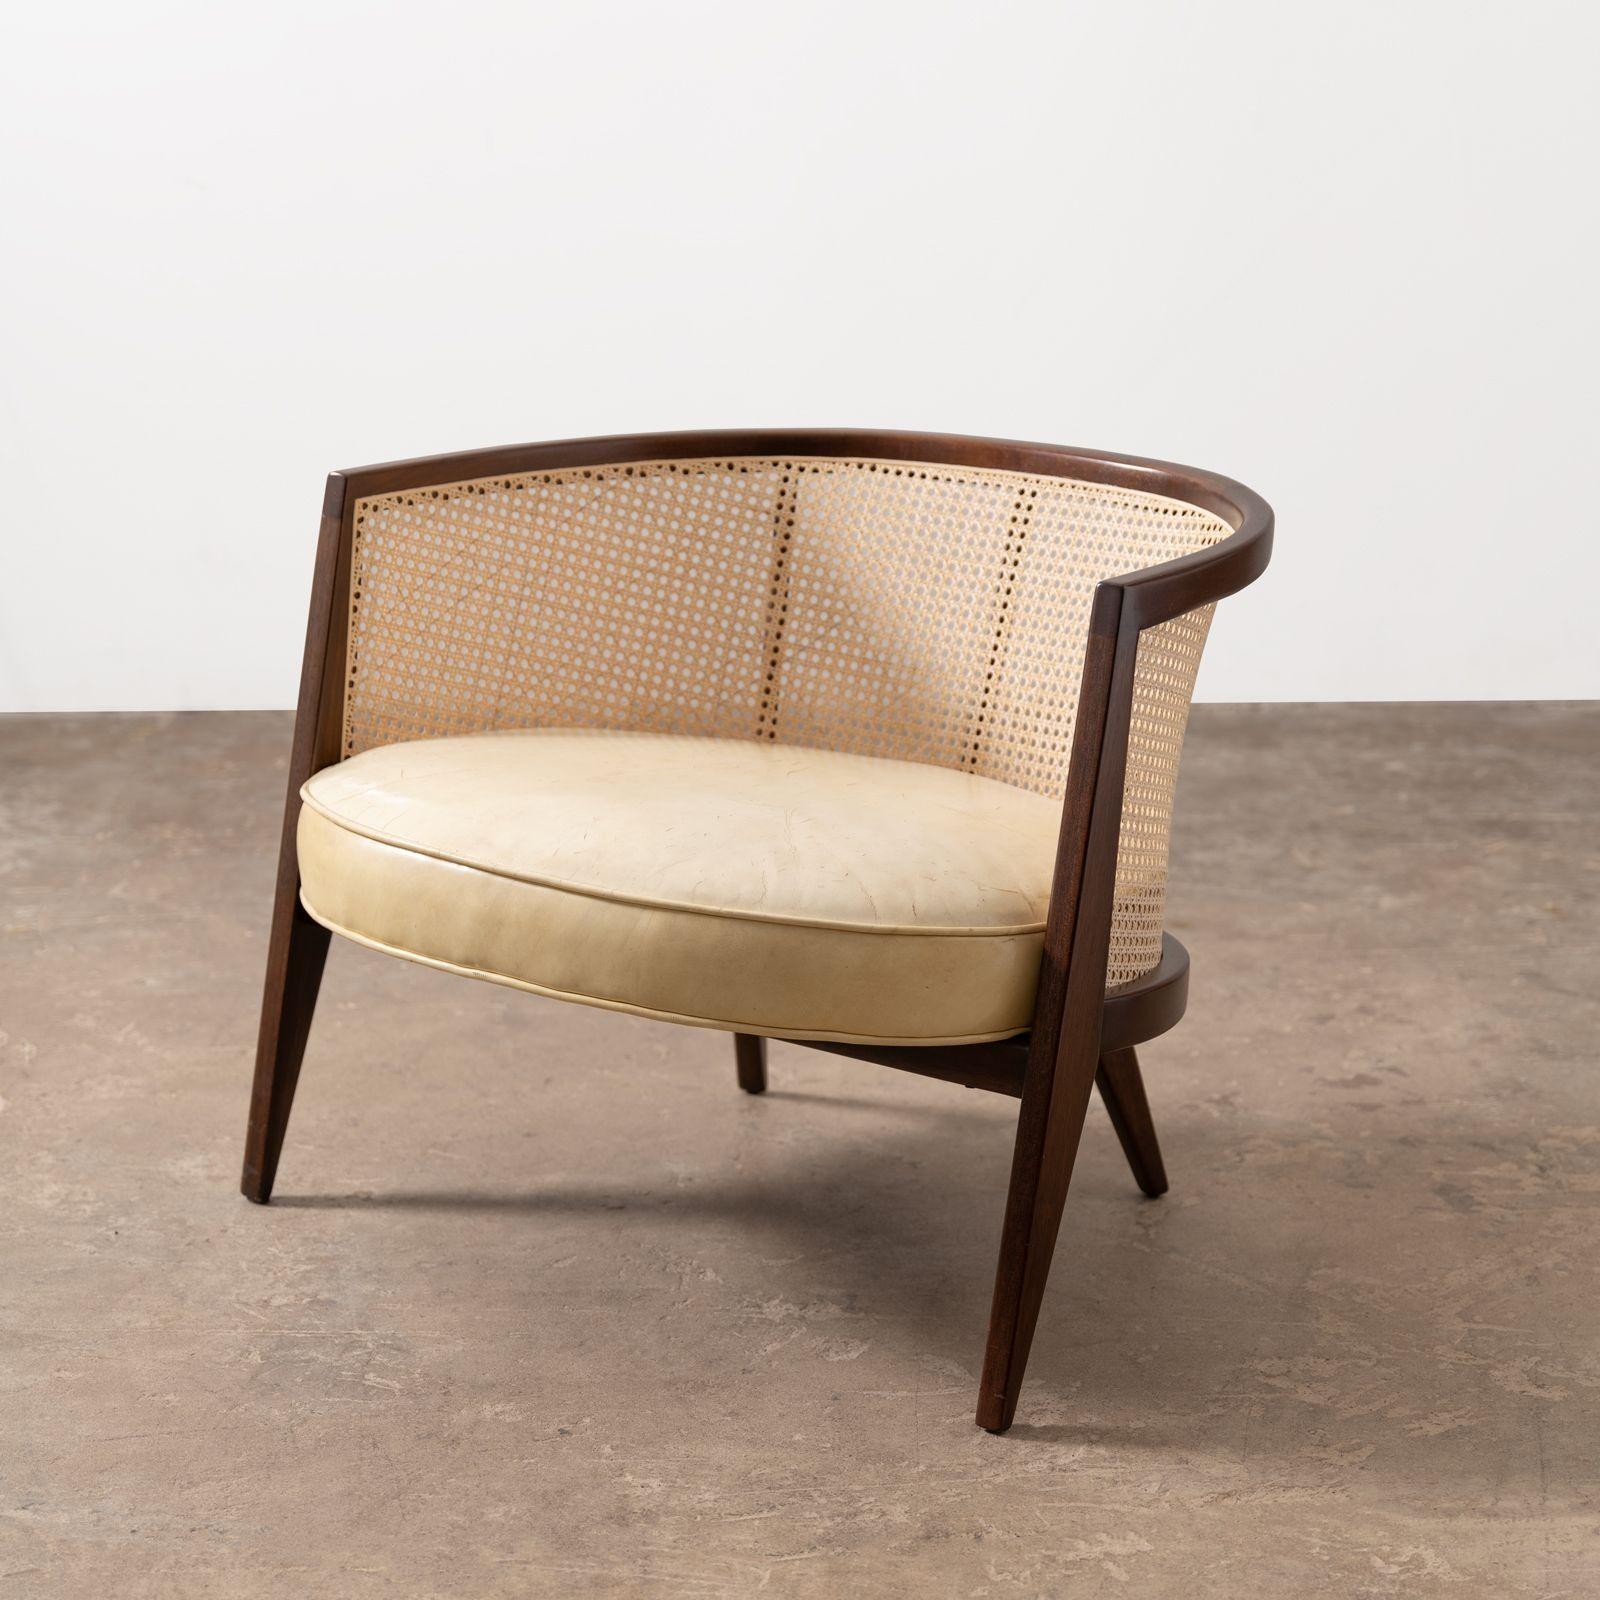 Extraordinarily well designed 1960's cane back lounge chair by Harvey Probber. Constructed of solid mahogany and restored with new handwoven raw cane. The frame has been refinished to the highest possible standard with a period-appropriate satin